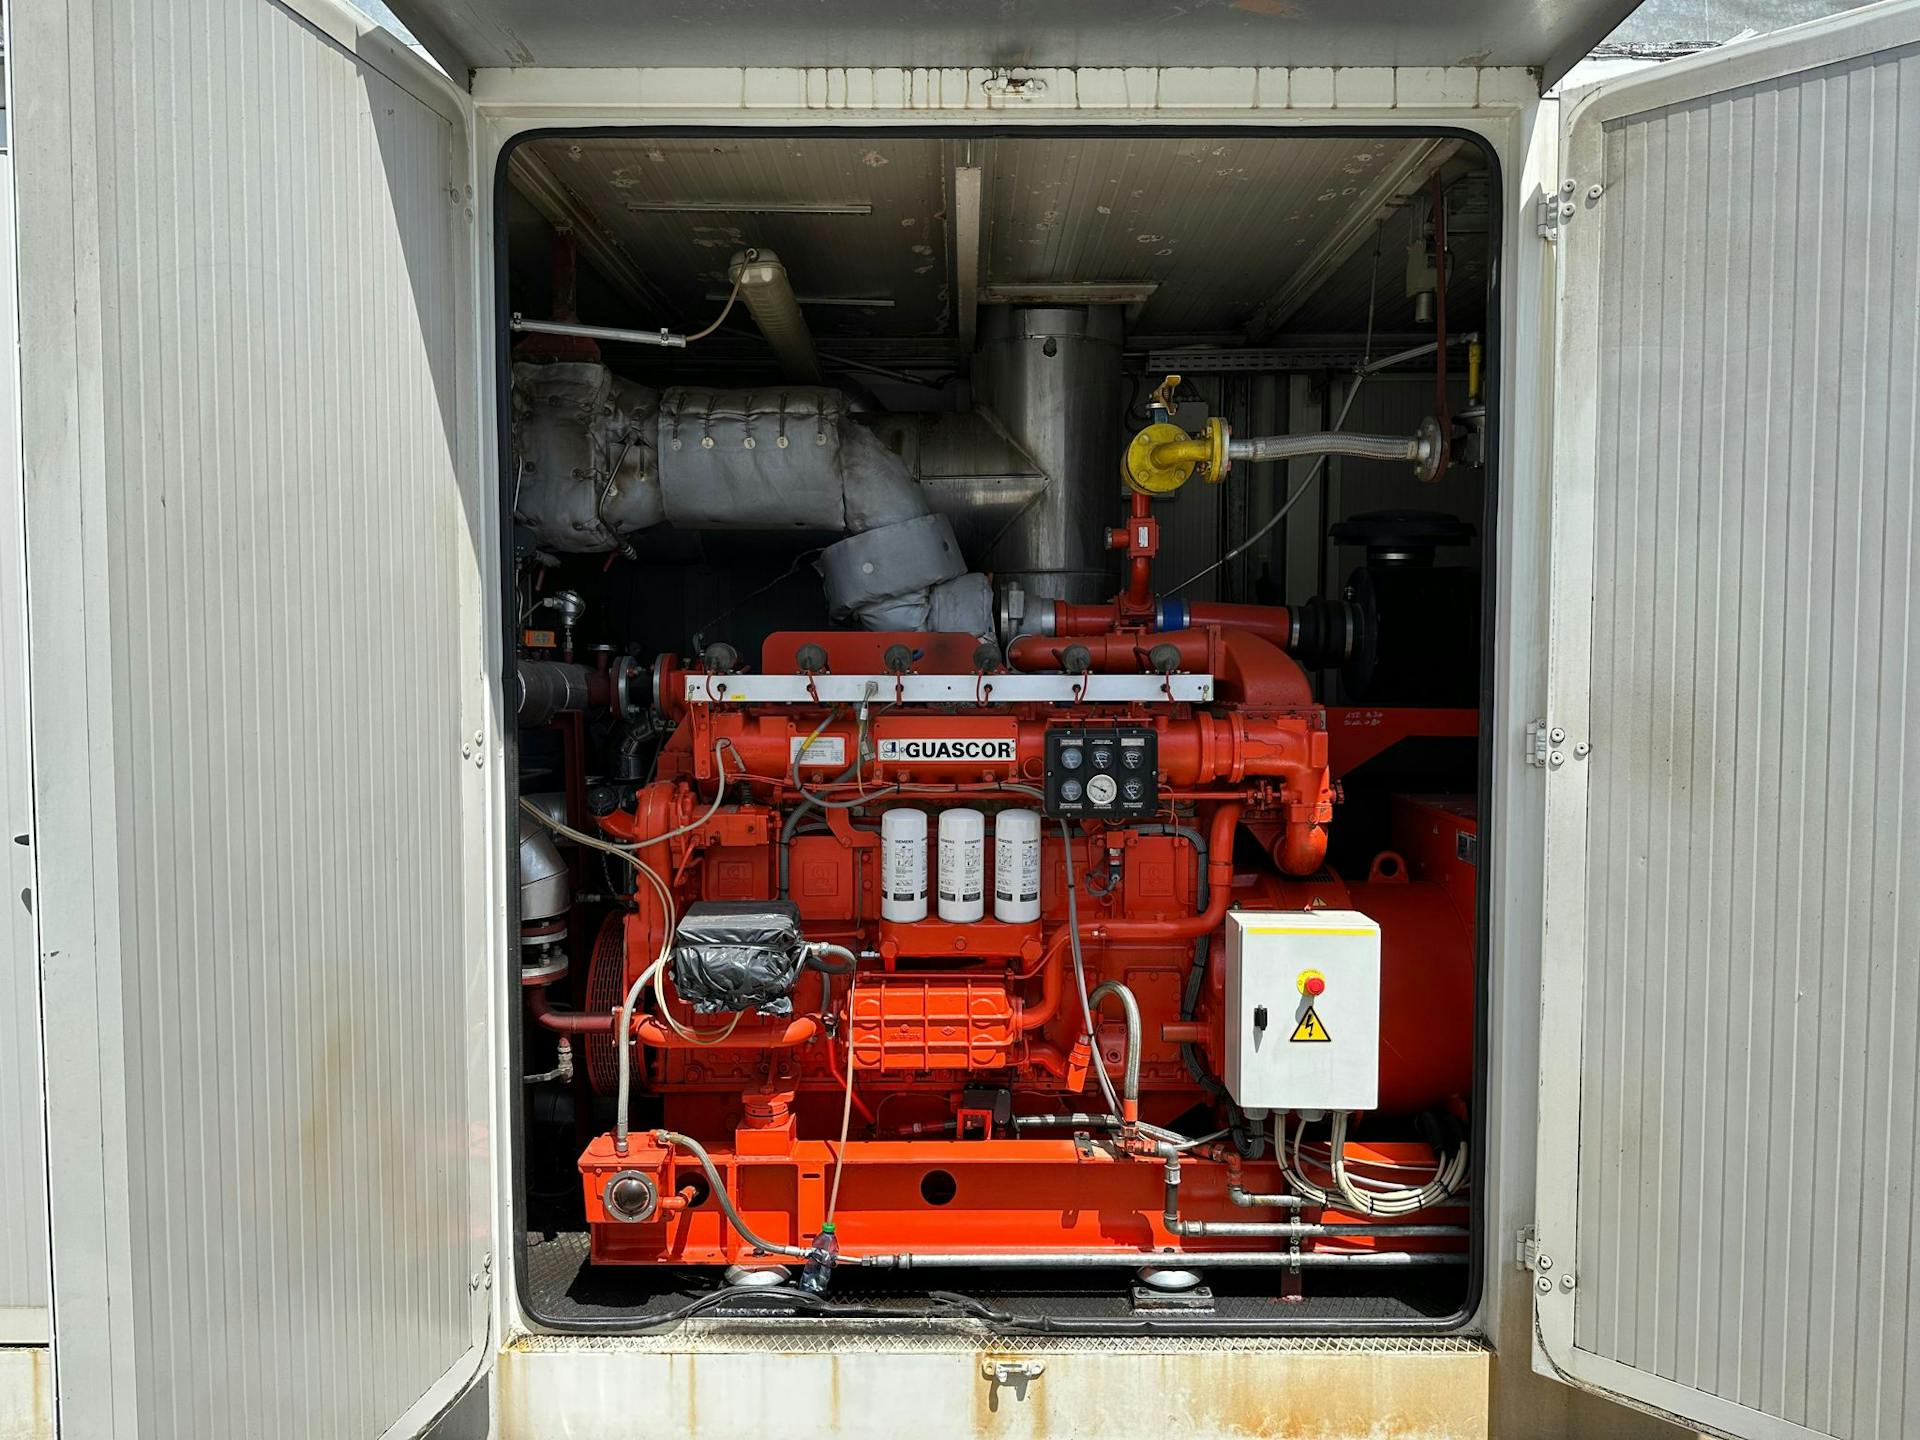 nullPhoto of Guascor FGLD180 Natural Gas Generator Set showing doors opening to inside of generator - gas generator for sale uk used